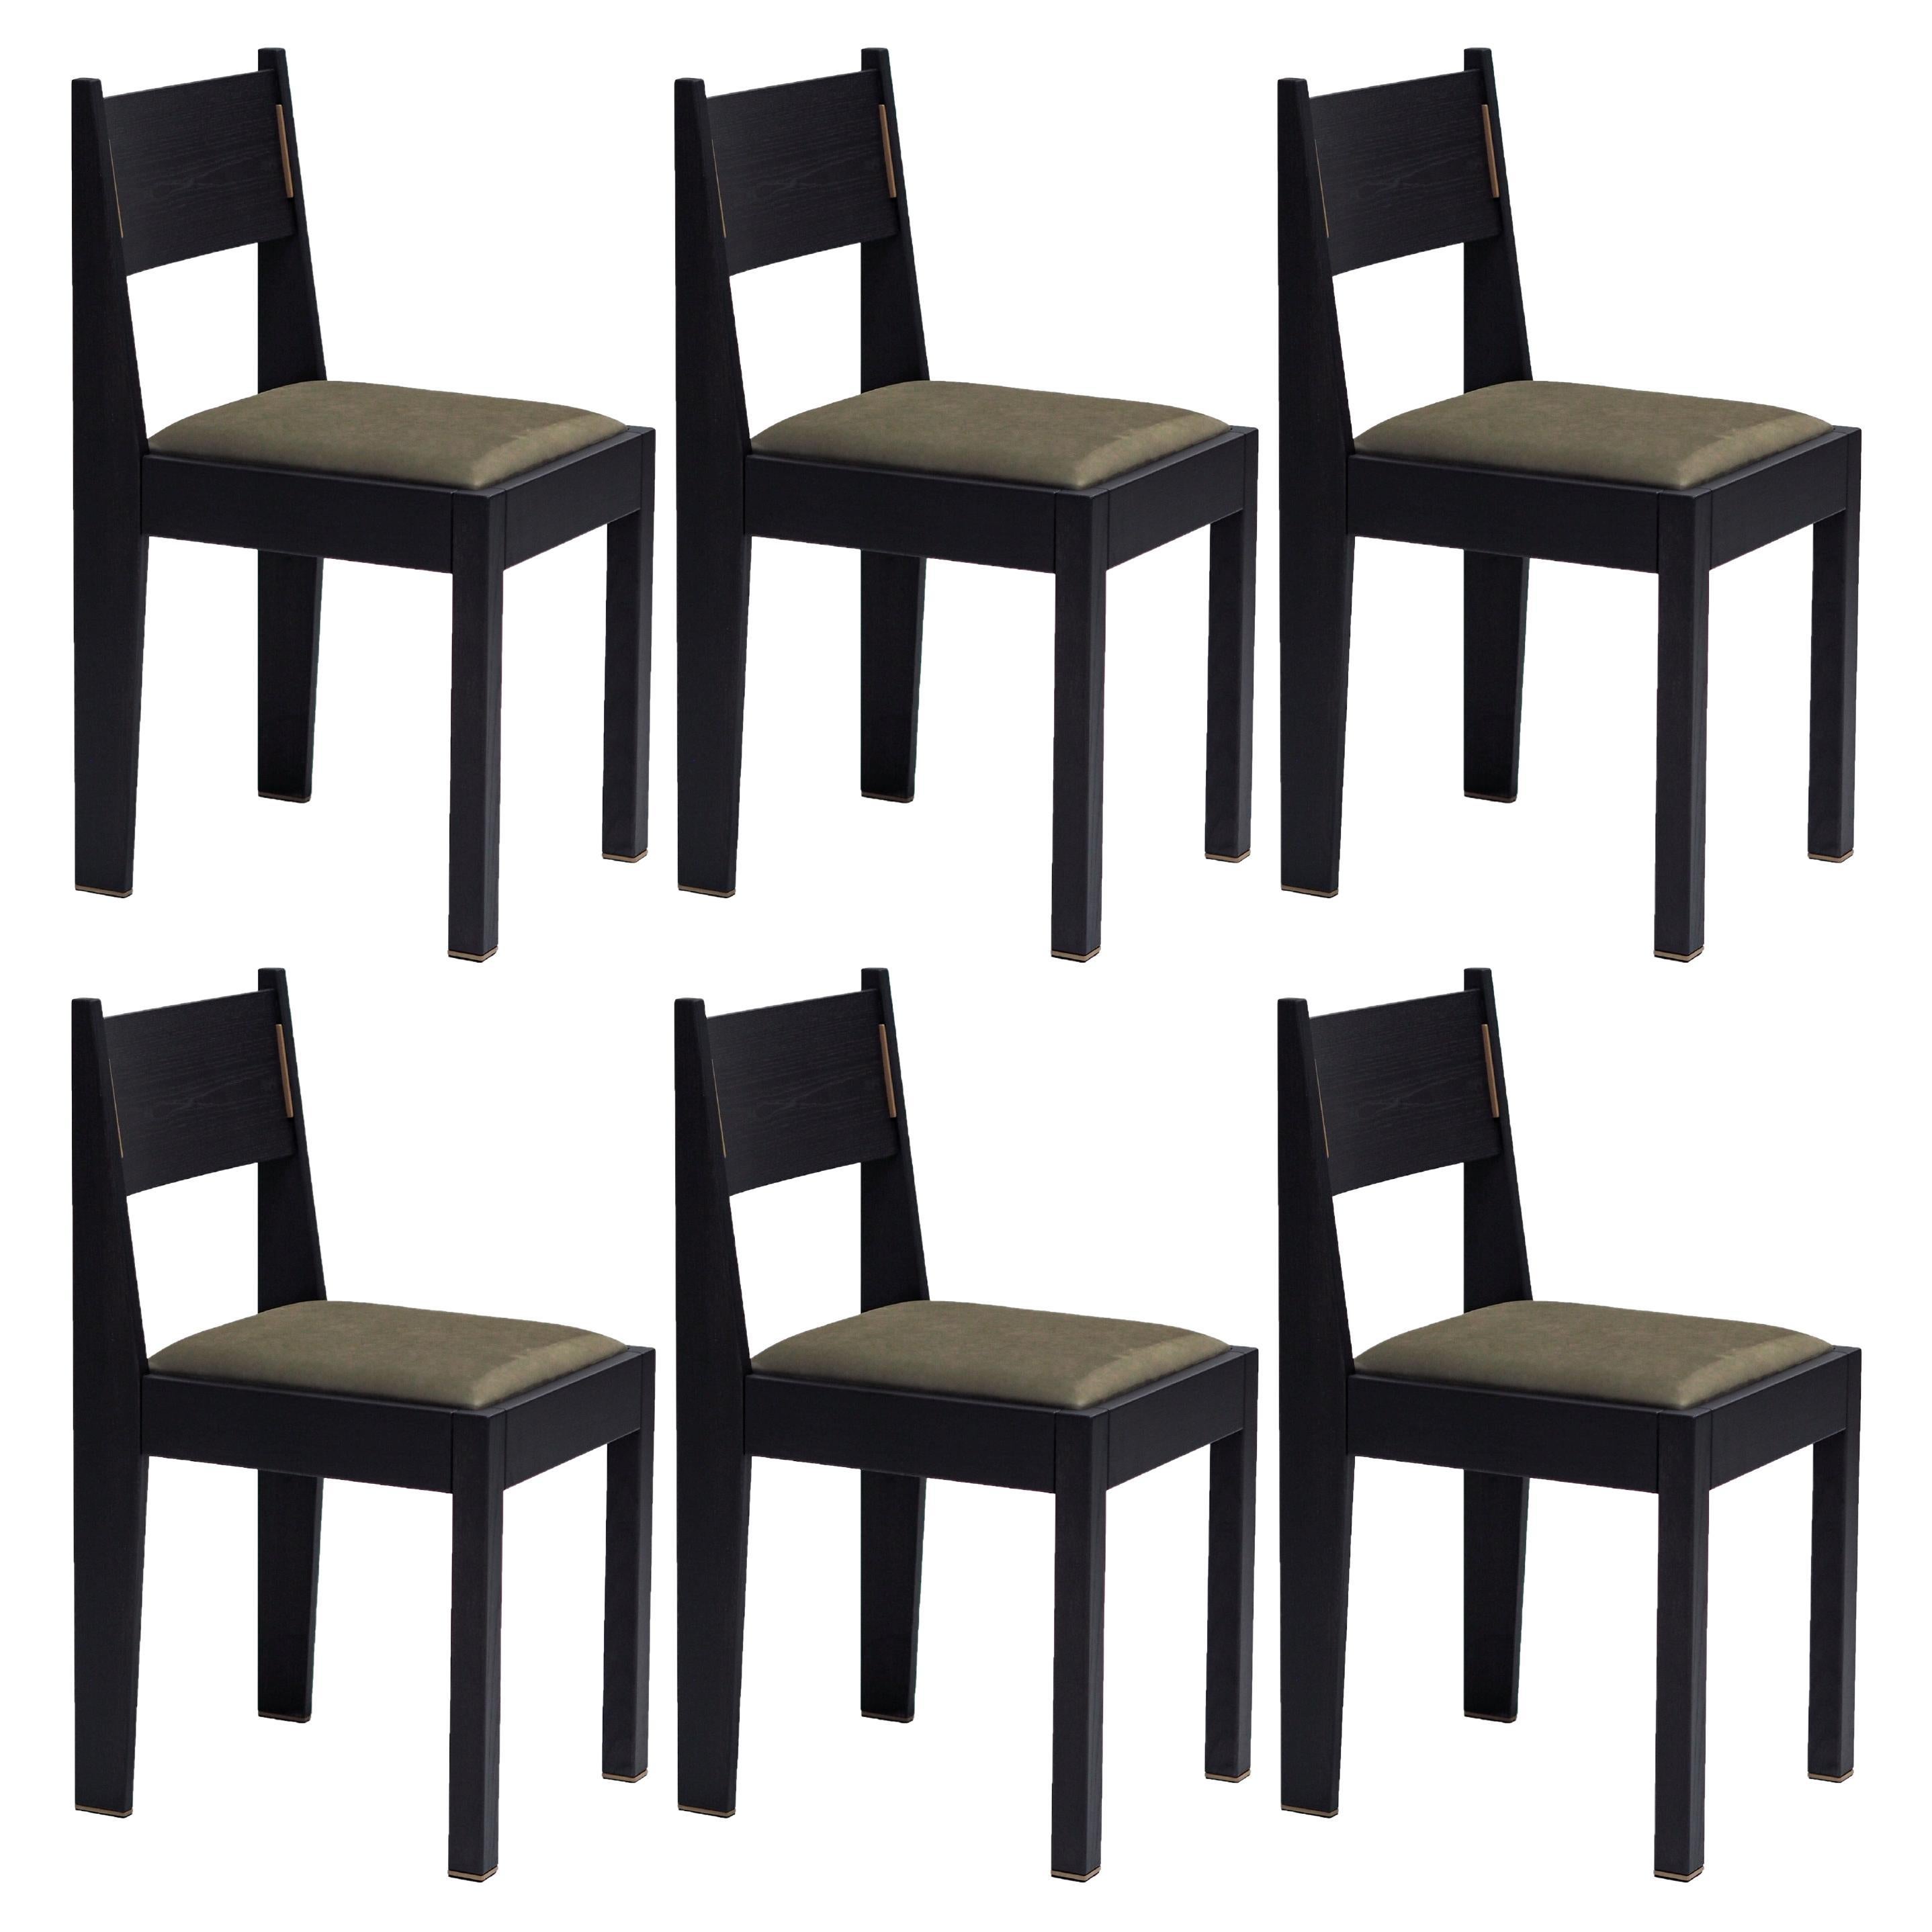 Set of 6 Art Deco Chair, Black Ash Wood, Leather Upholstery & Brass Details For Sale